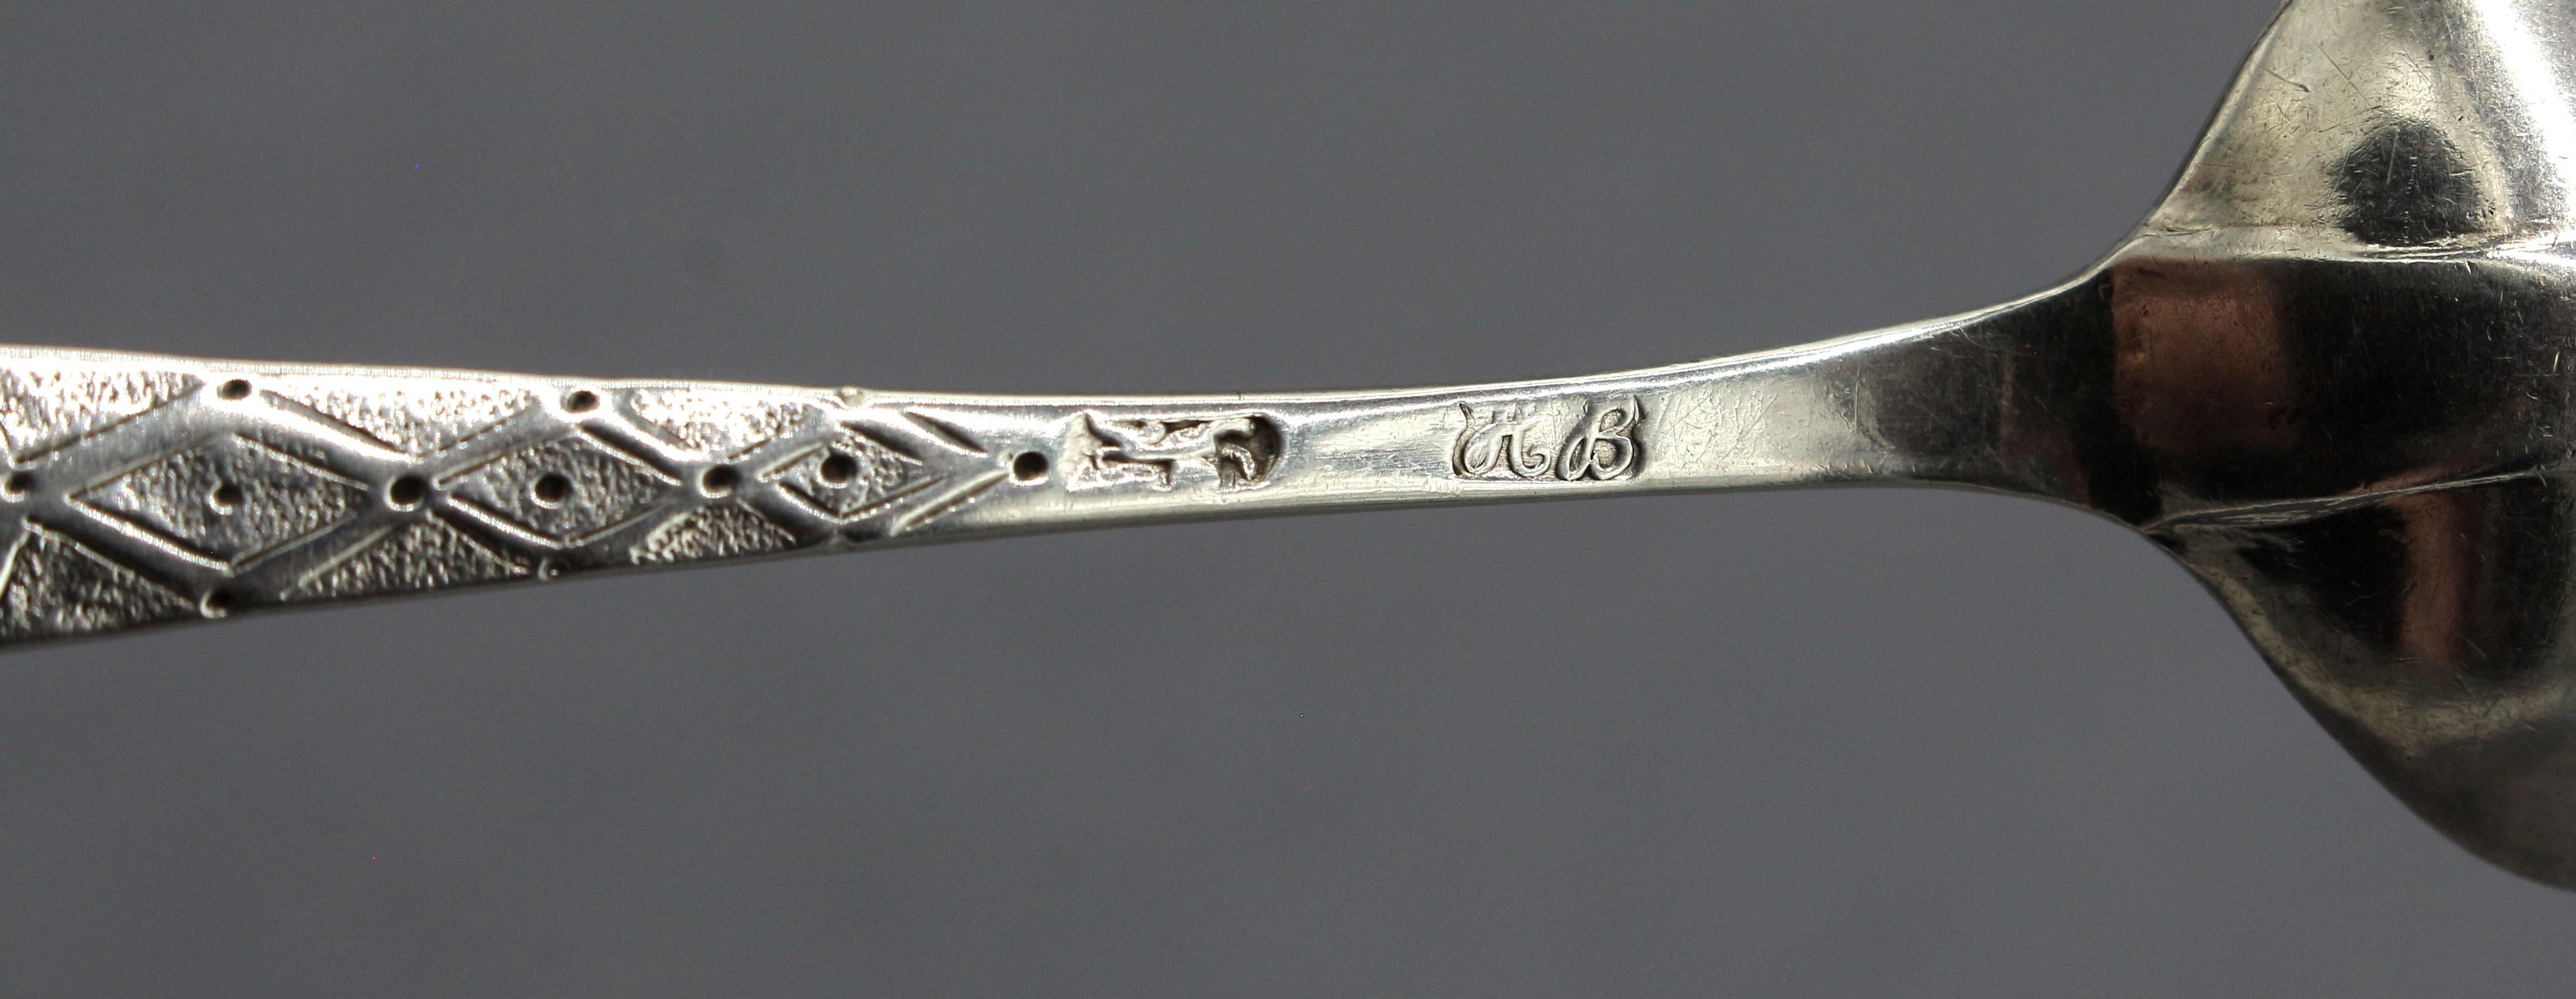 Late 18th Century Set of 4 Sterling Silver Coffee Spoons by Hester Bateman, London, c.1775 For Sale